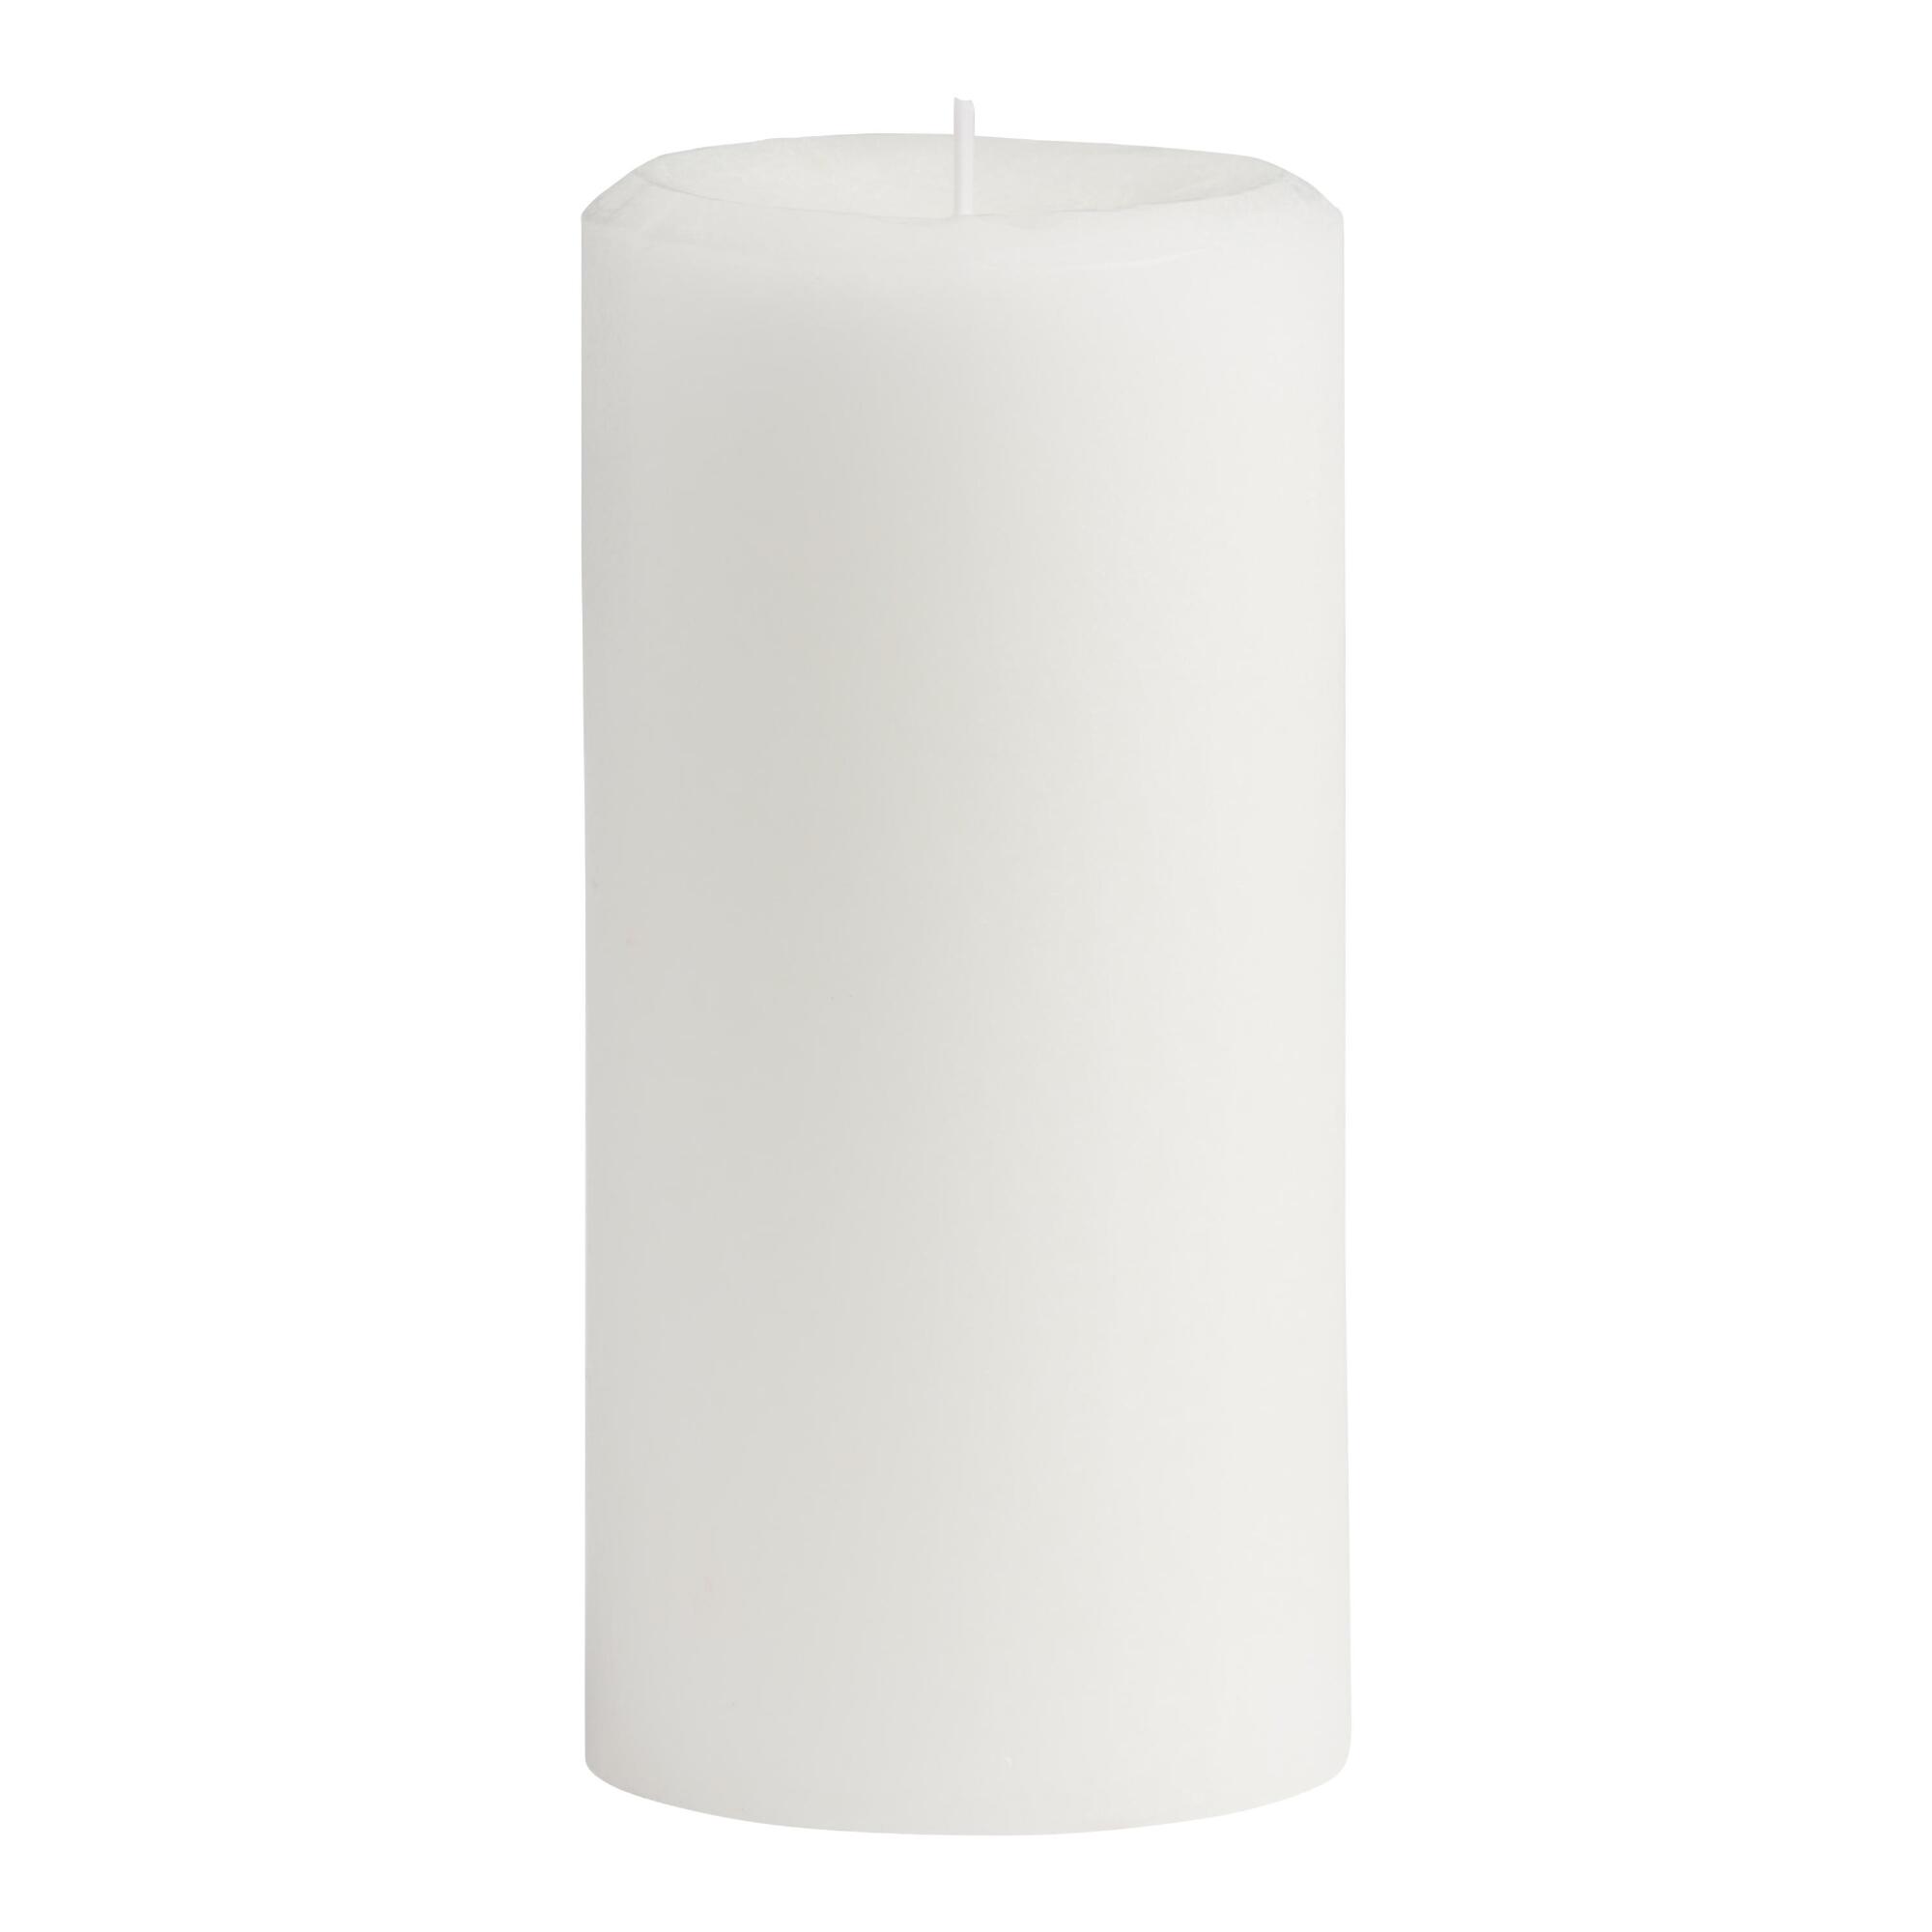 3x6 Moroccan Peony Mottled Pillar Scented Candle: White - Scented Wax by World Market